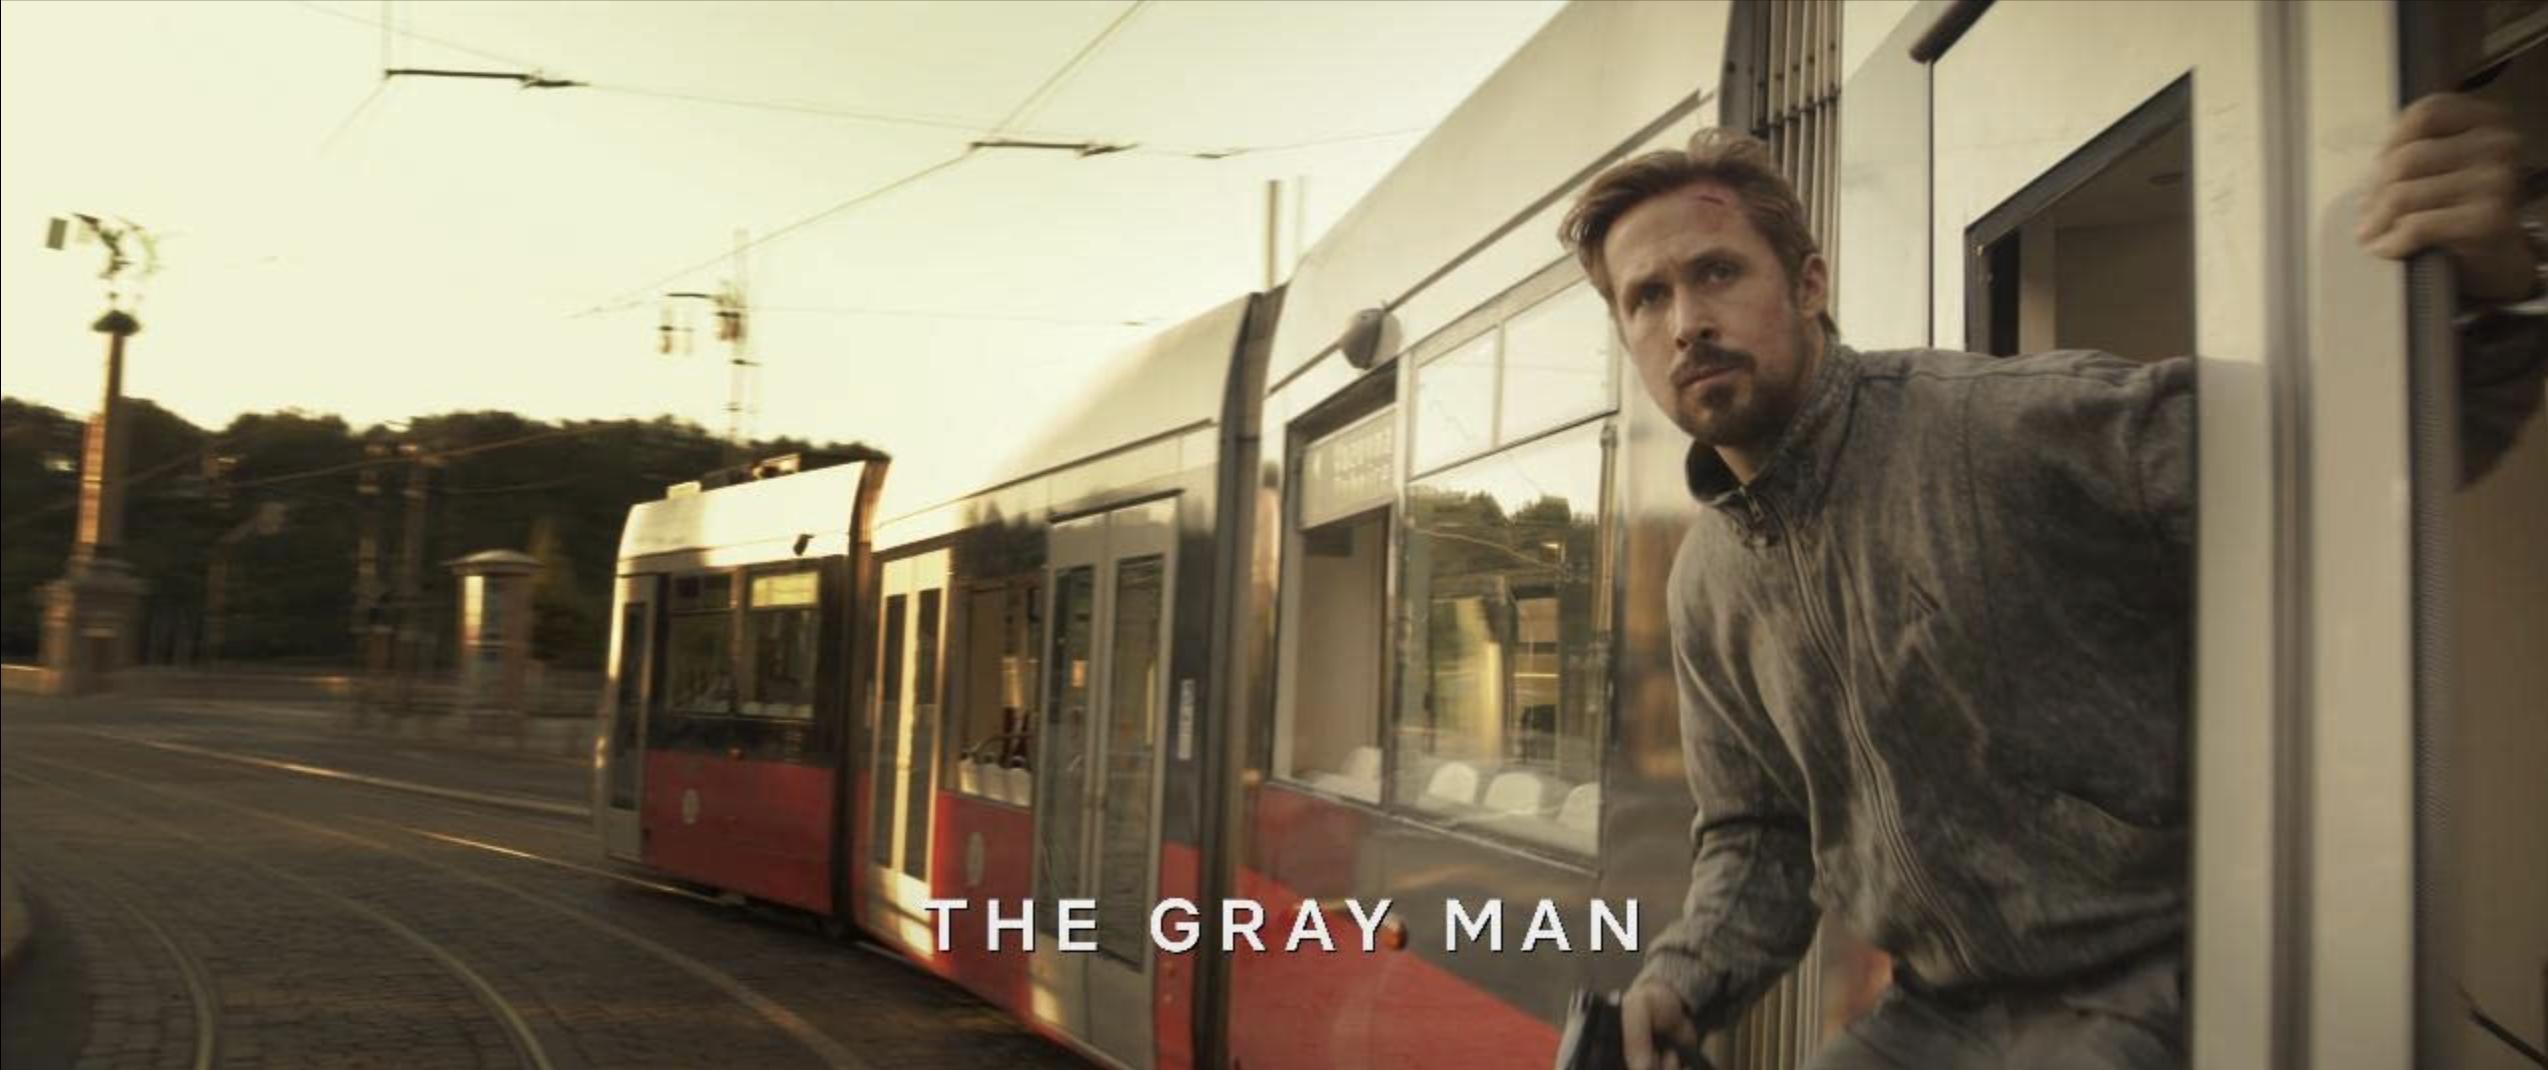 The Grey Man review: A missed opportunity - EazyEnt